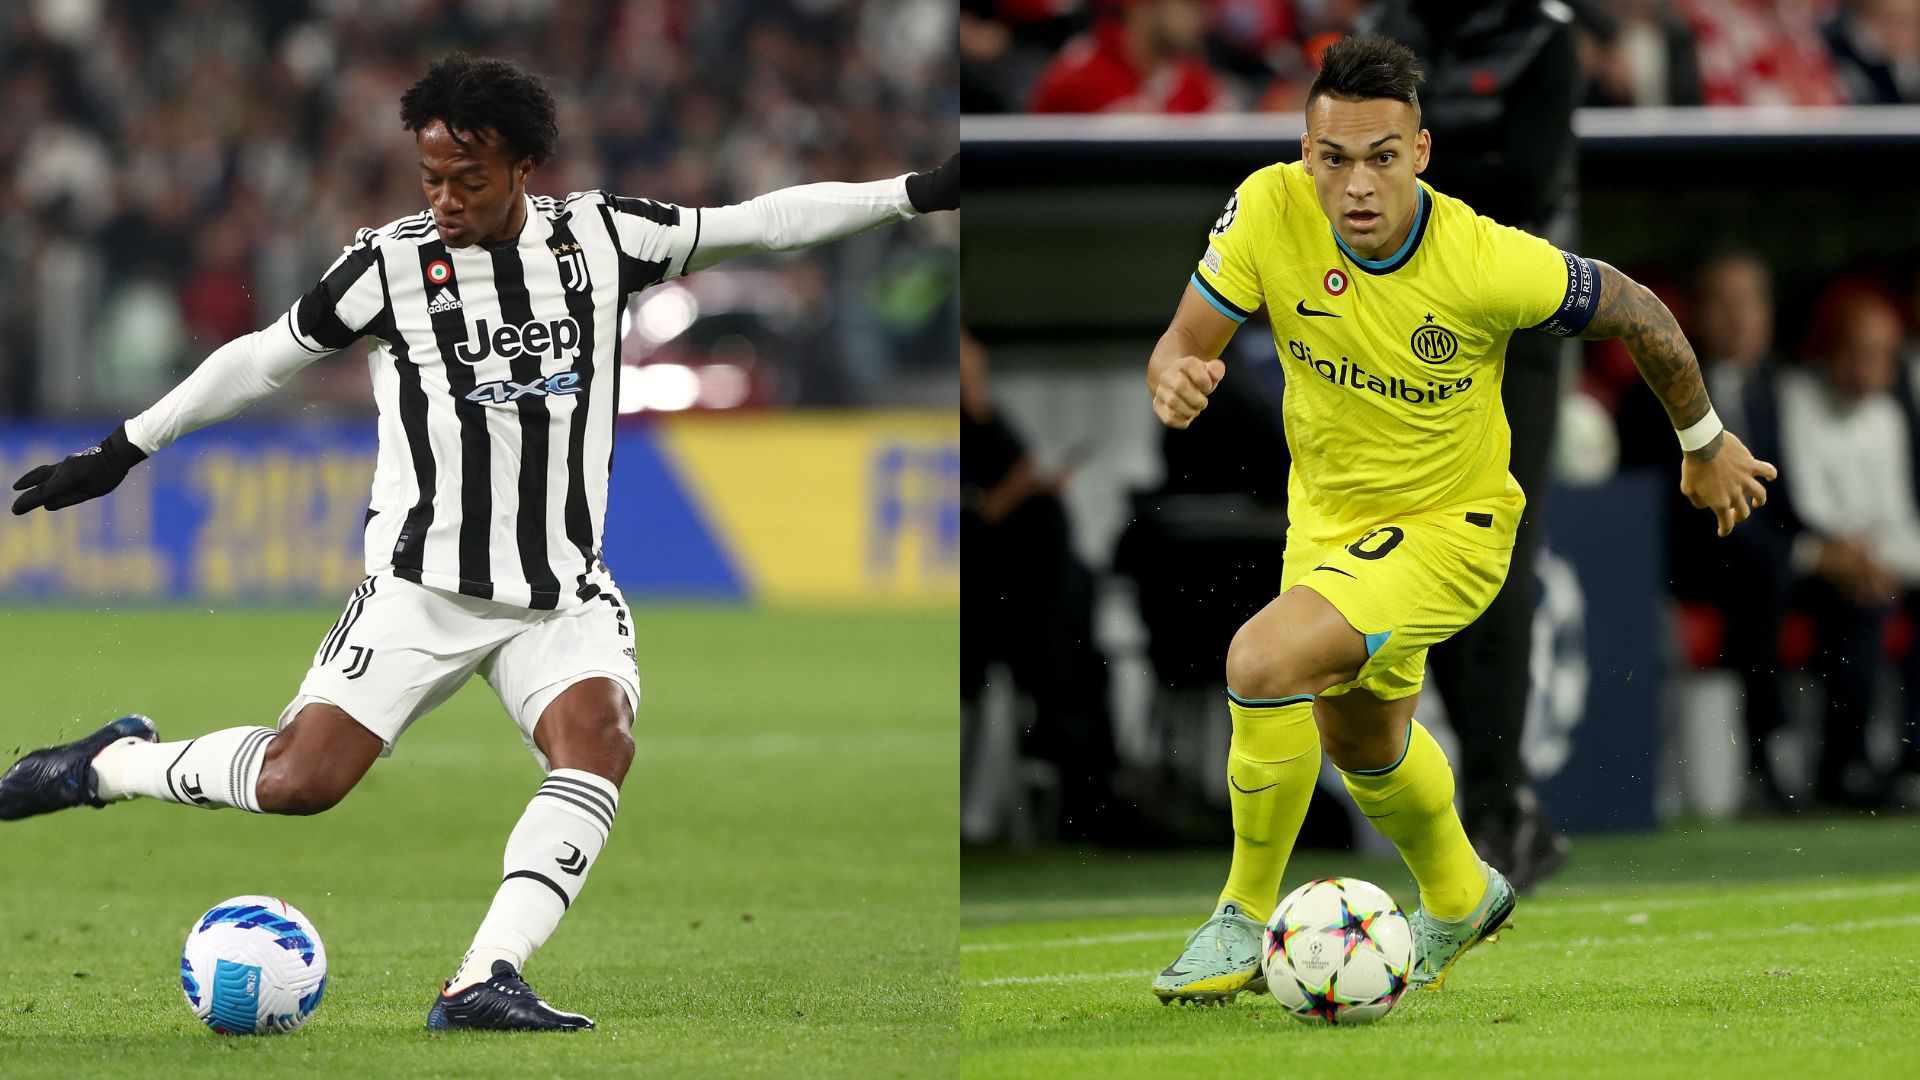 Juventus vs Lazio: A Battle for Supremacy on the Football Pitch